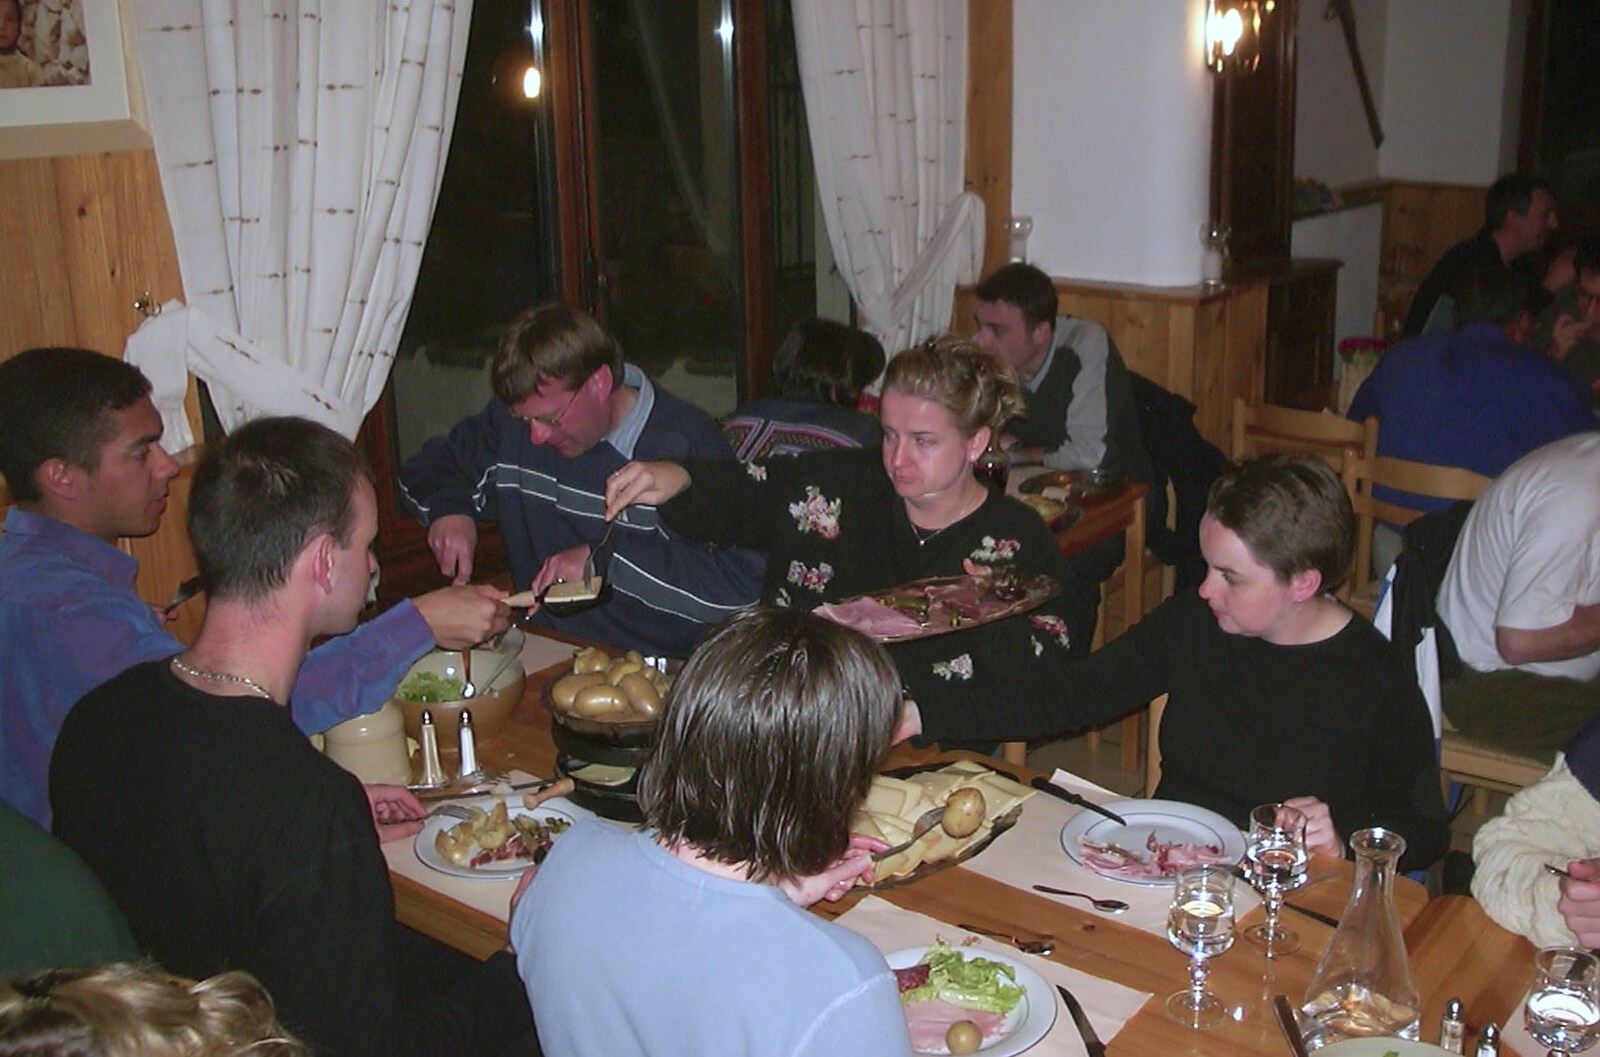 At dinner, it's time for raclette from 3G Lab Goes Skiing In Chamonix, France - 12th March 2002